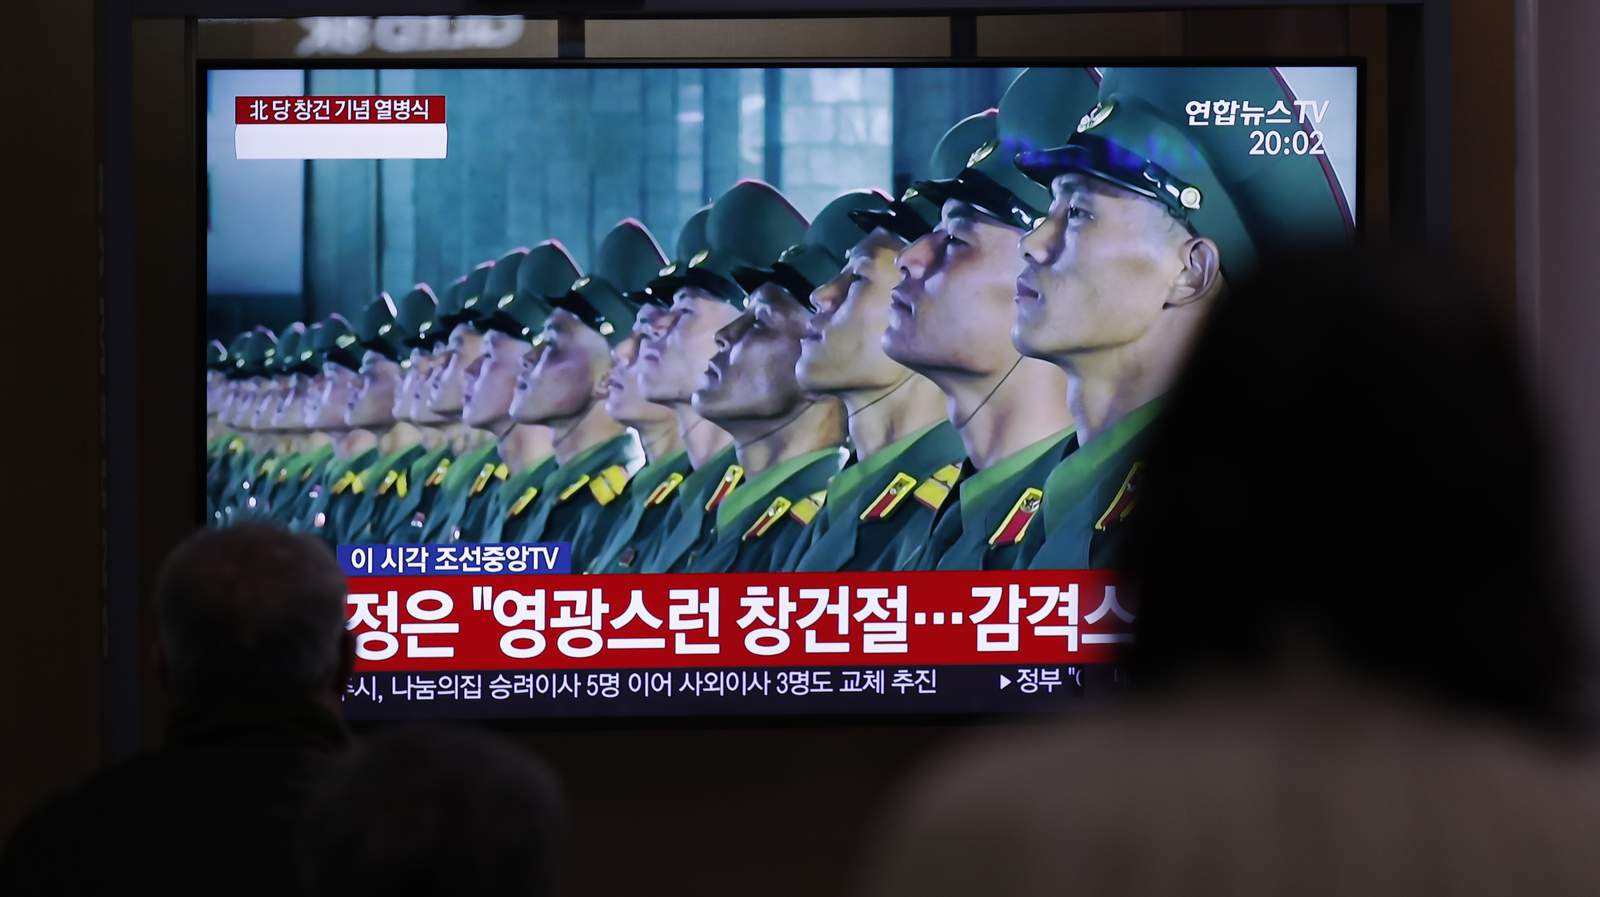 North Korea unveils new weapons at military parade